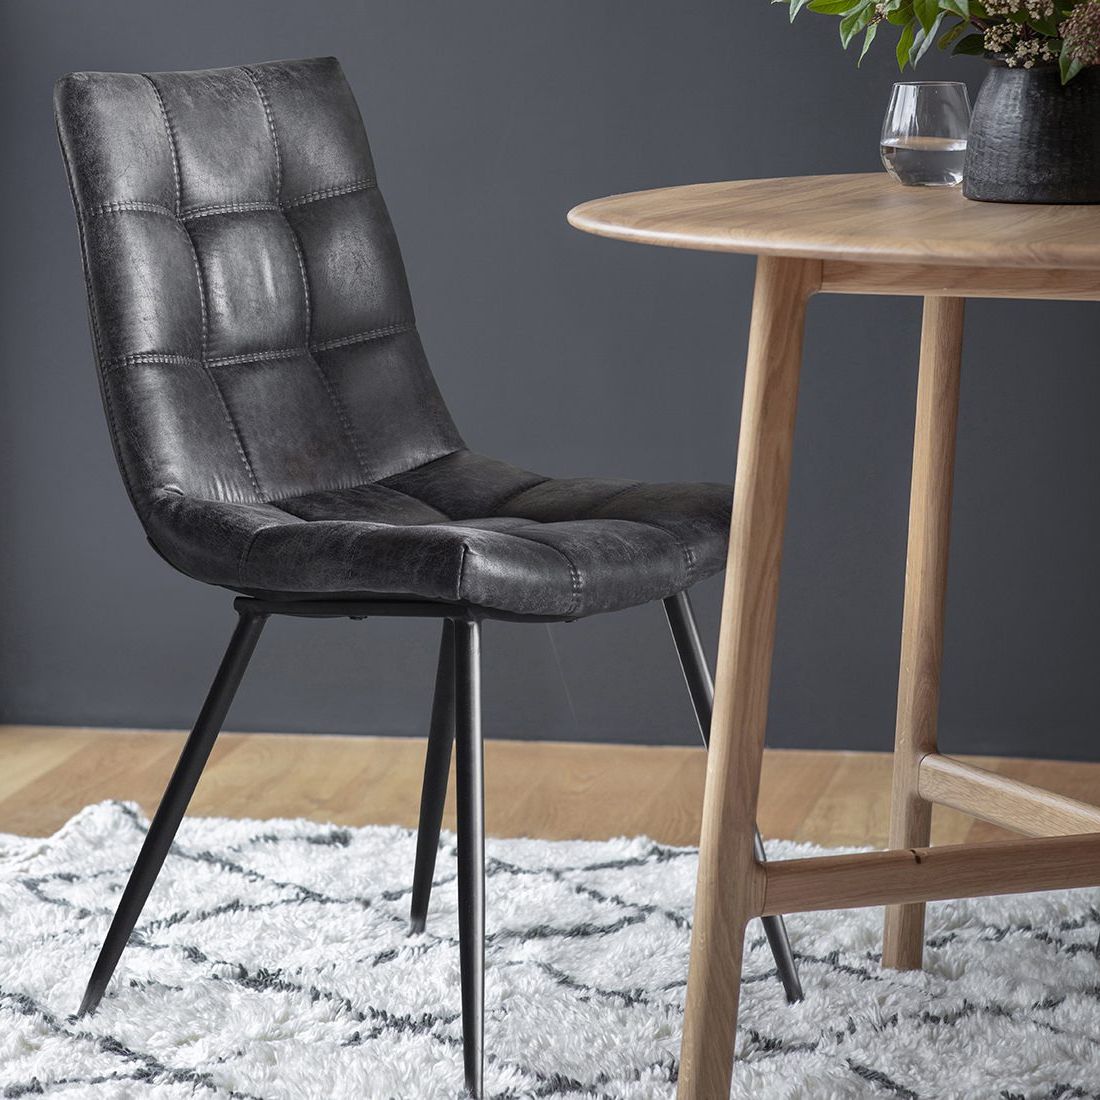 2019 Charcoal Fabric Patio Chair And Side Table In Set Of Two Charcoal Grey Faux Leather Dining Chairs (View 3 of 15)